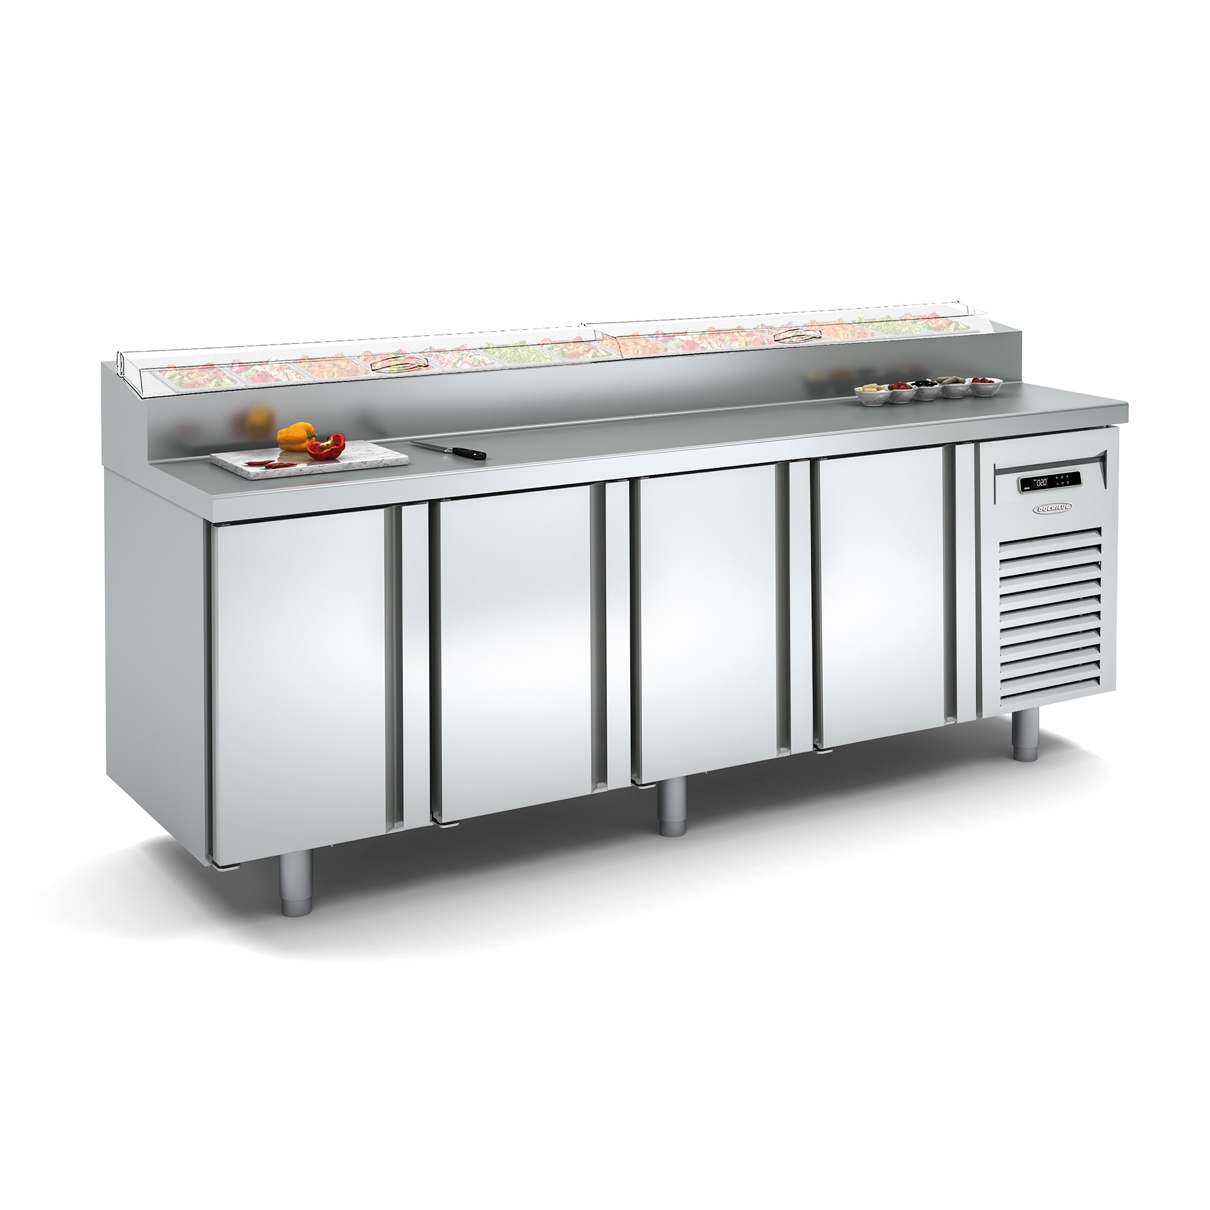 Gastronorm 1/1 Refrigerated Table for Food Preparation MEI-70-1/6